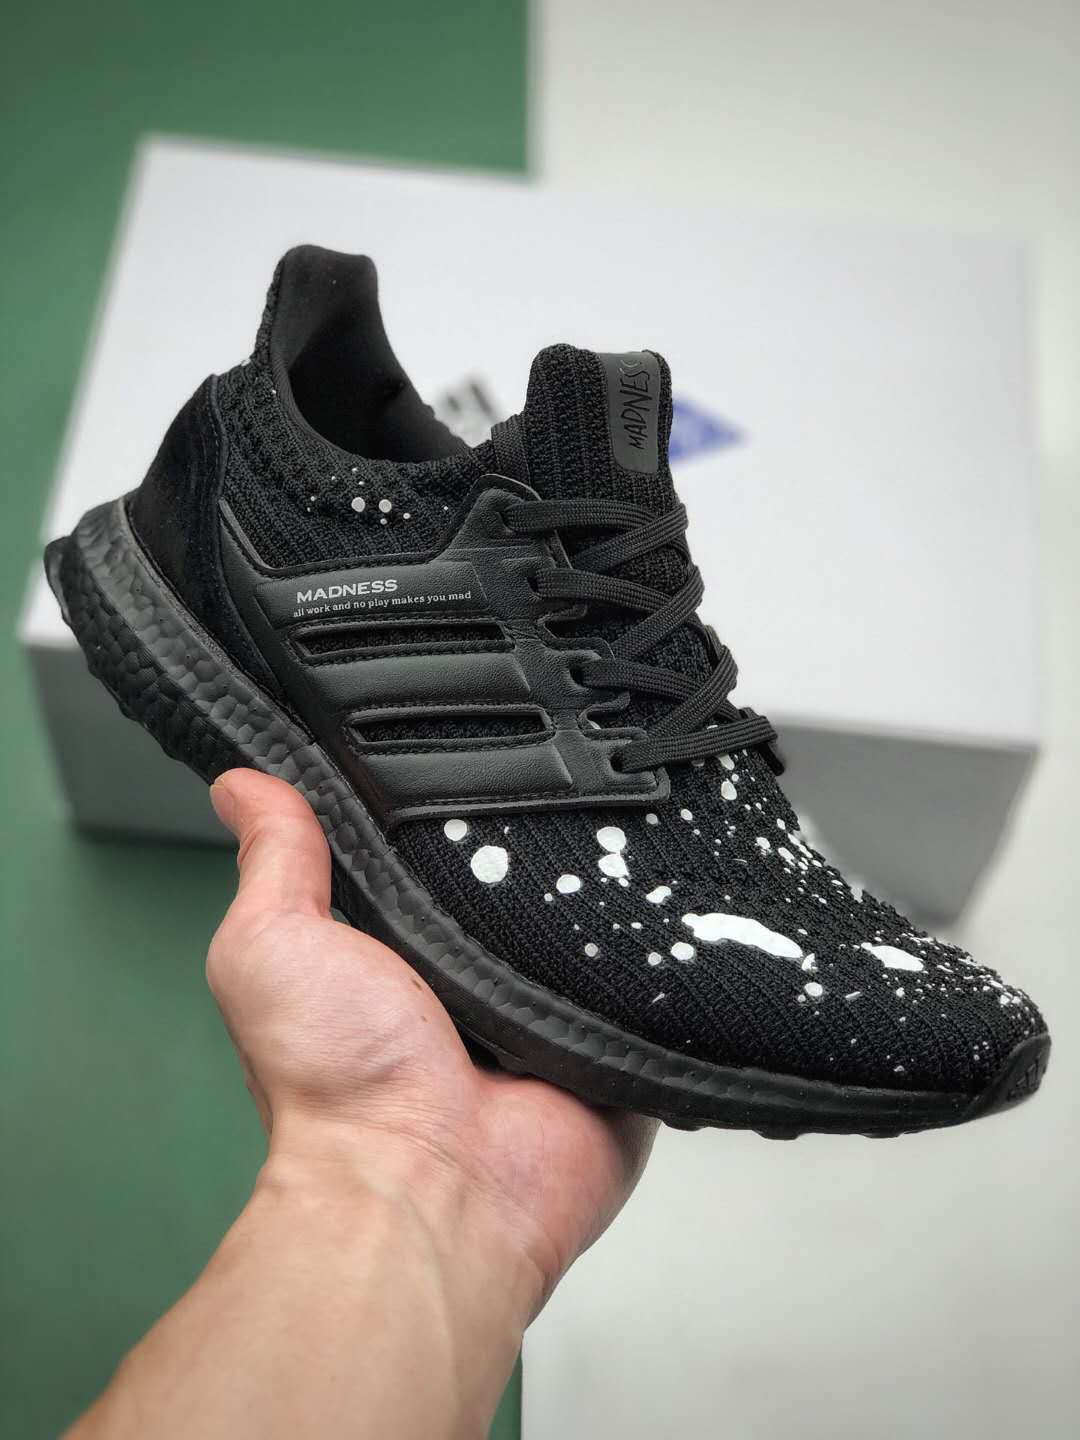 Adidas Madness x UltraBoost 4.0 'Black' EF0144 - Exclusive Release